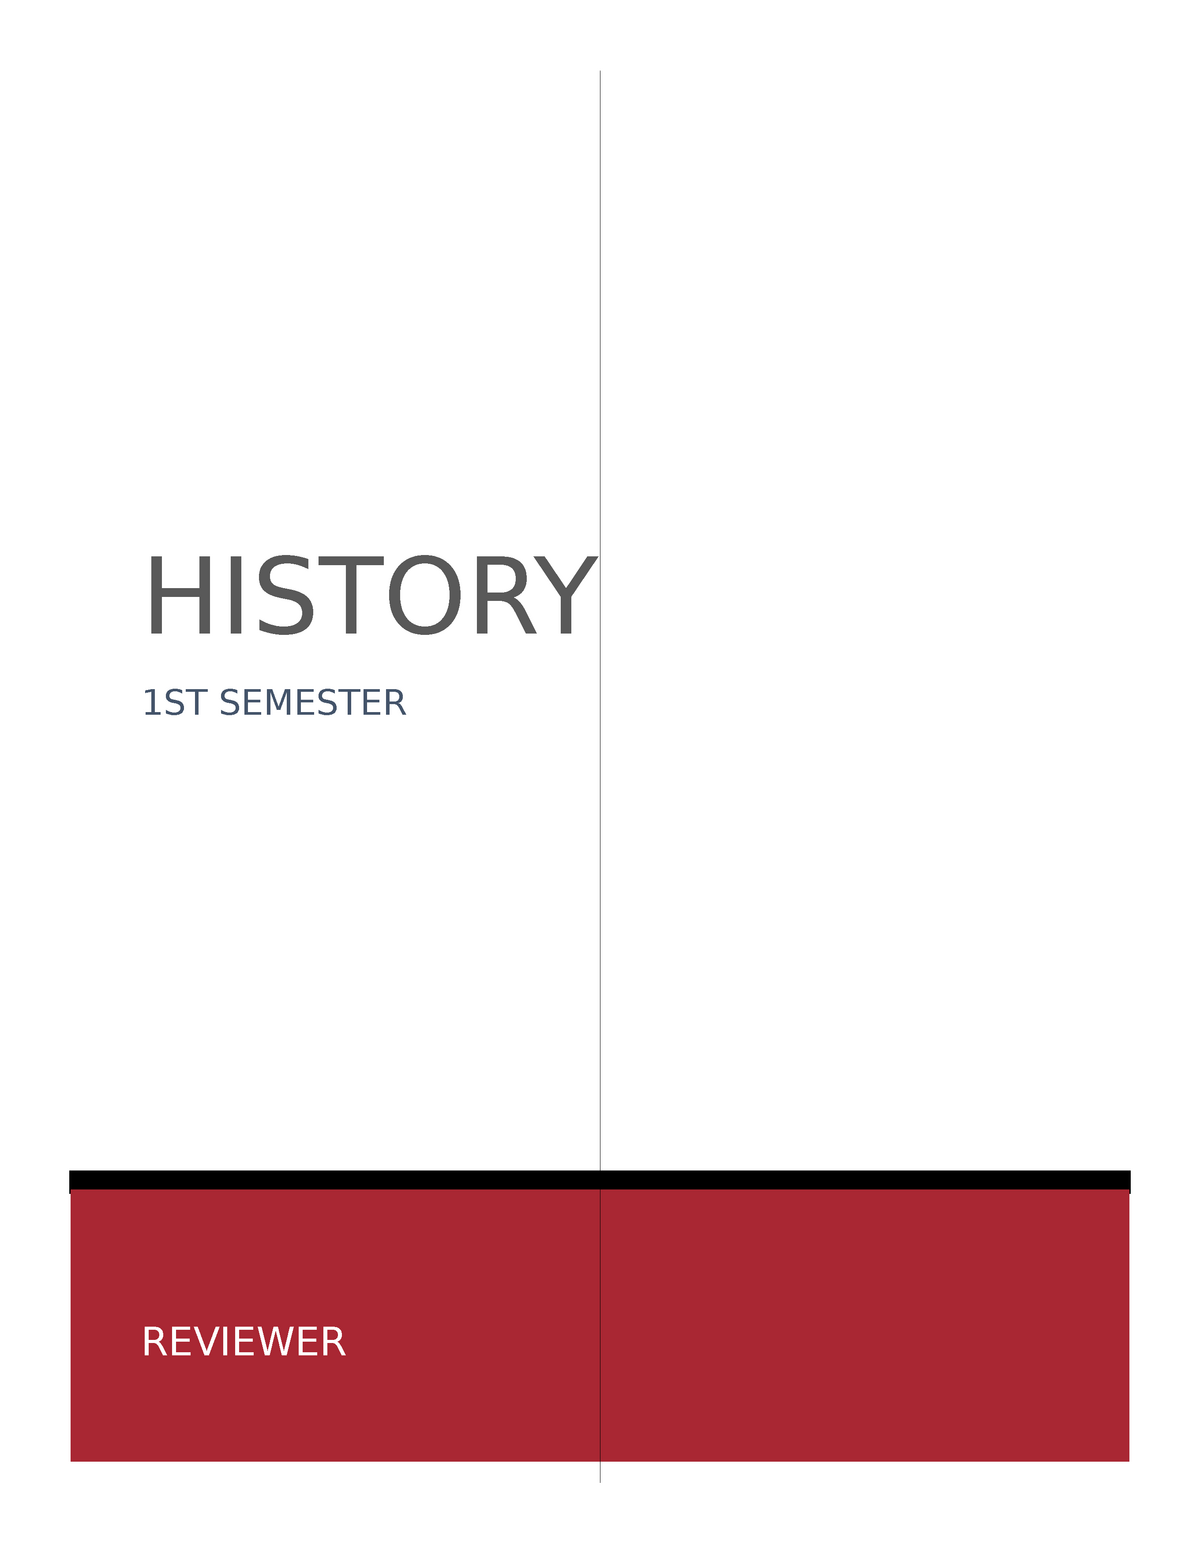 history-lecture-notes-3-7-reviewer-1st-semester-lesson-1-learning